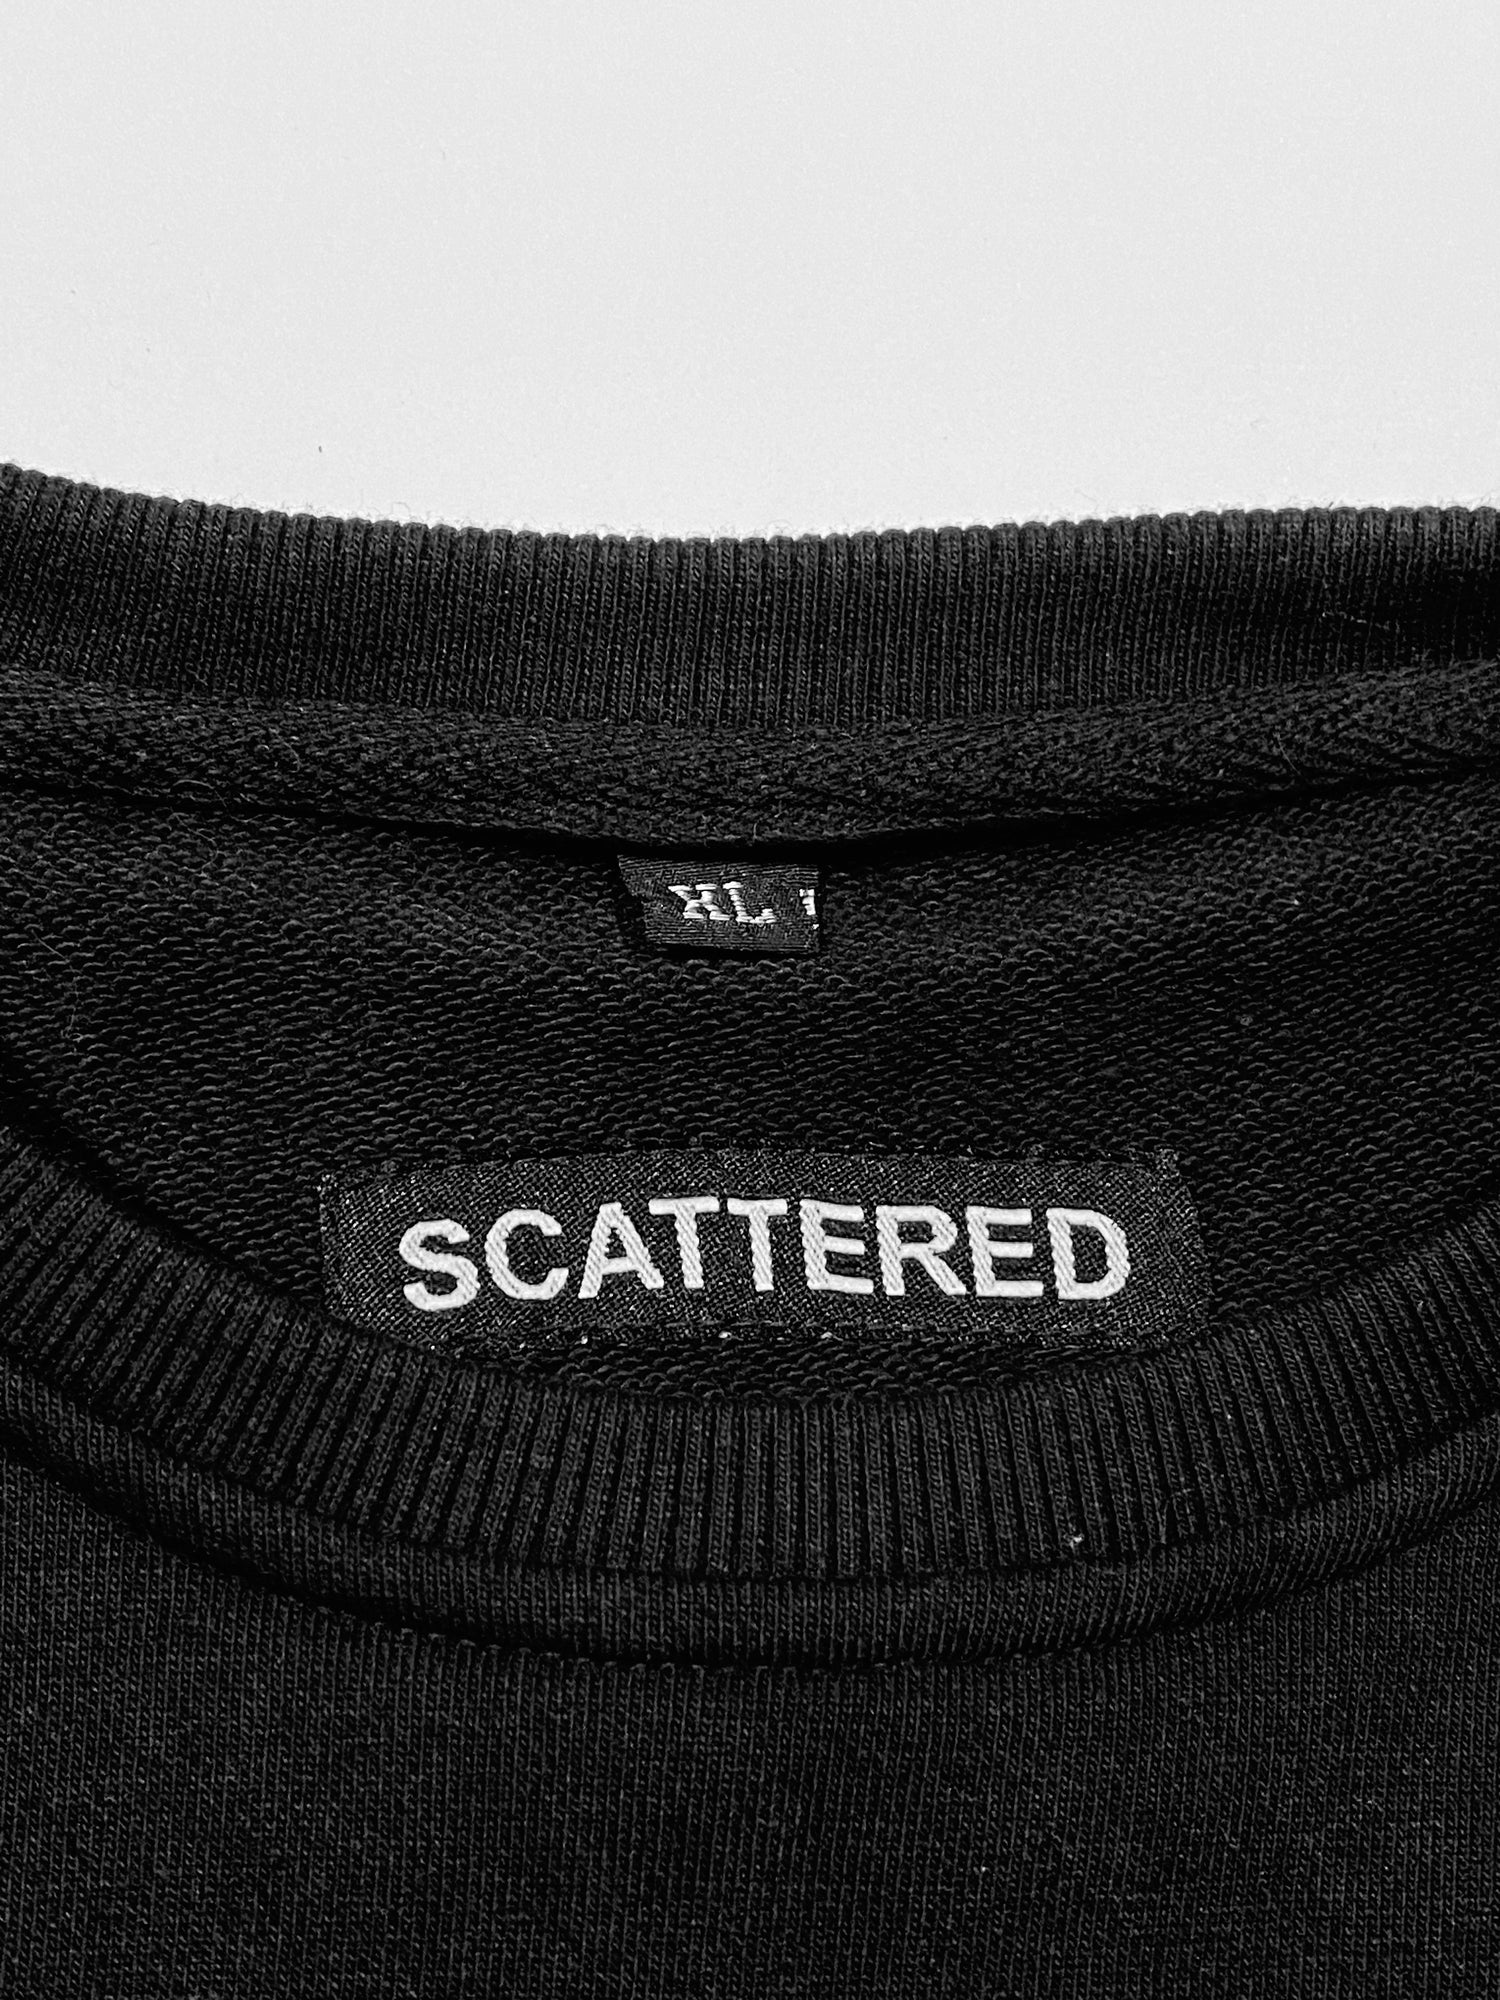 Scattered Black French Terry Sweatshirt Tag | Mens Clothing Streetwear